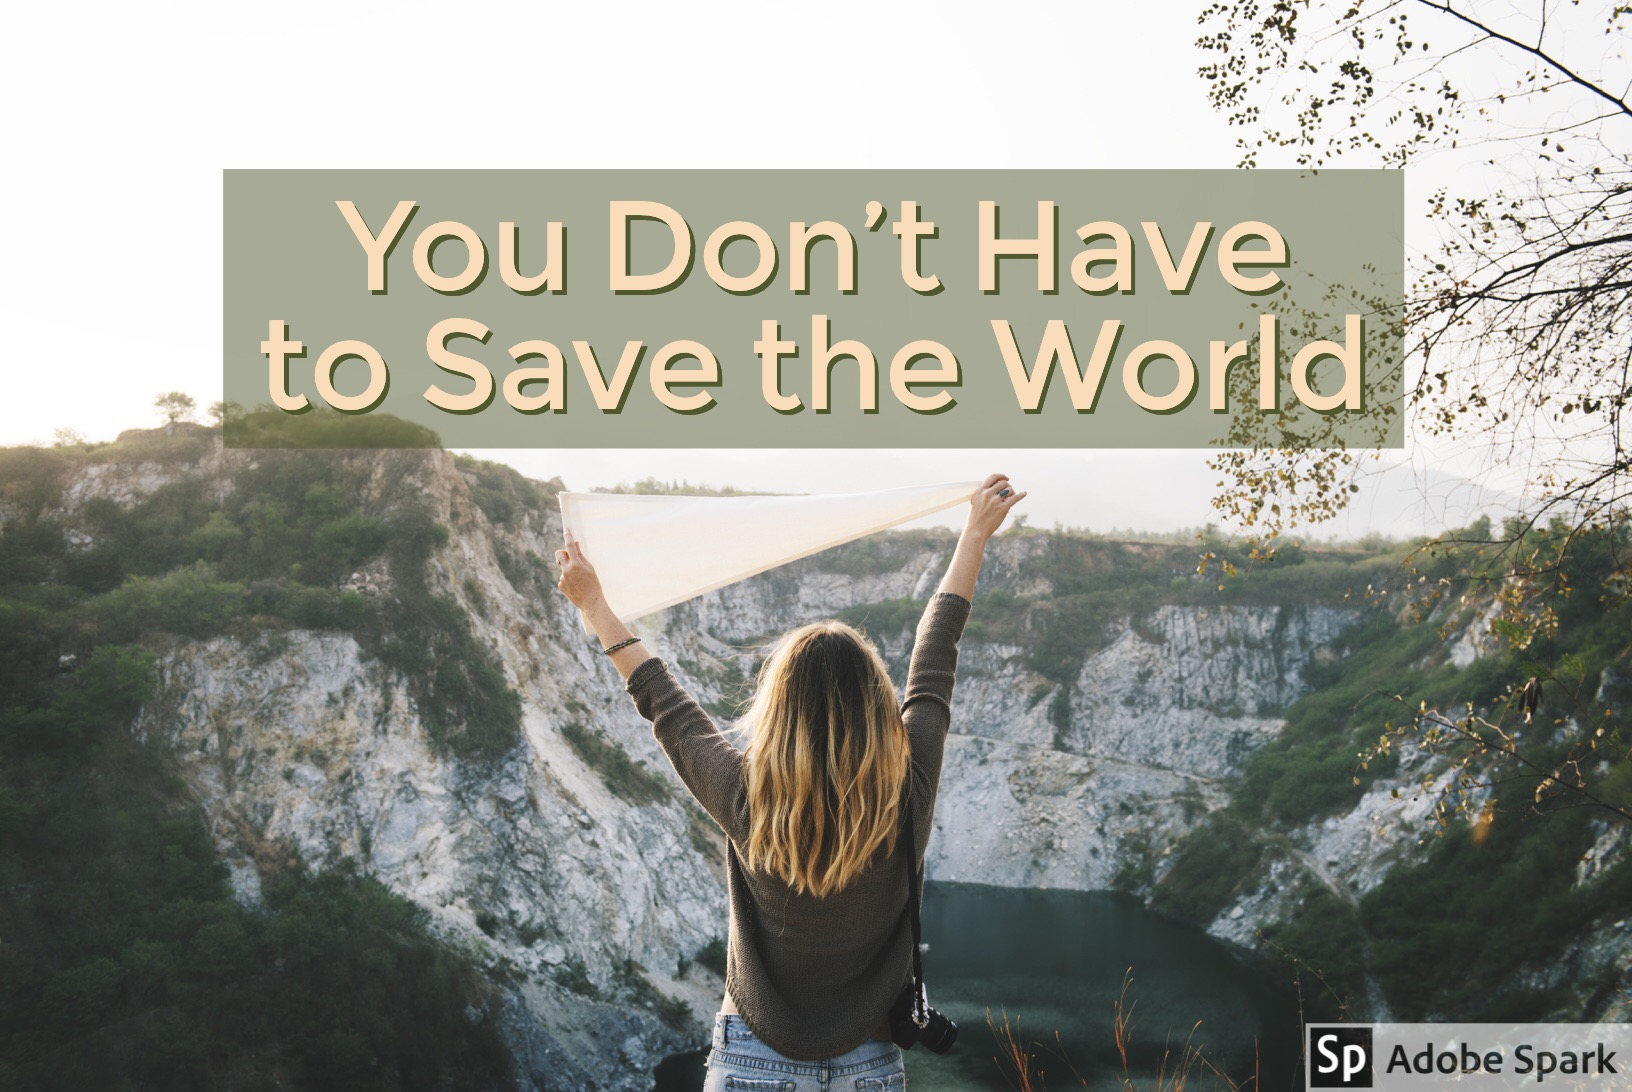 YOU DON’T HAVE TO SAVE THE WORLD